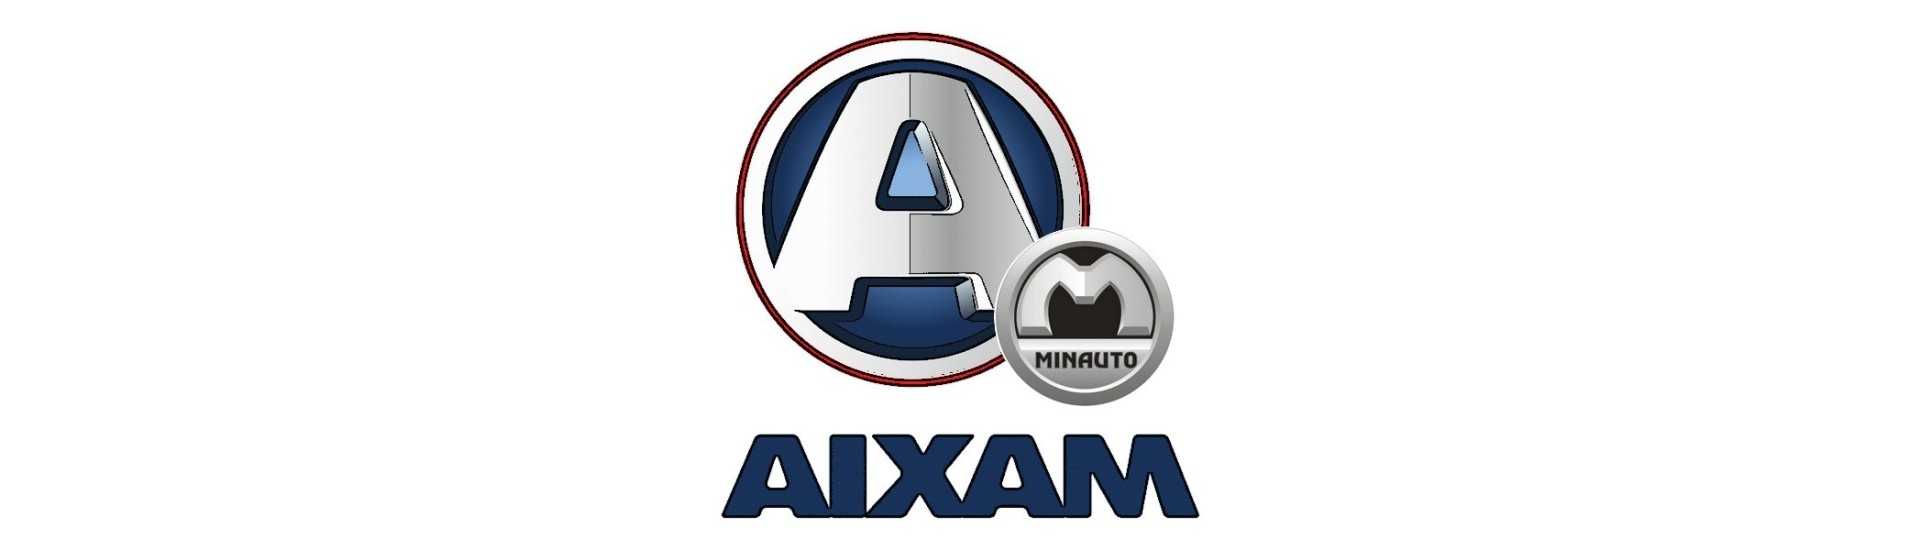 Door opening cable at the best price car without license Aixam Minauto